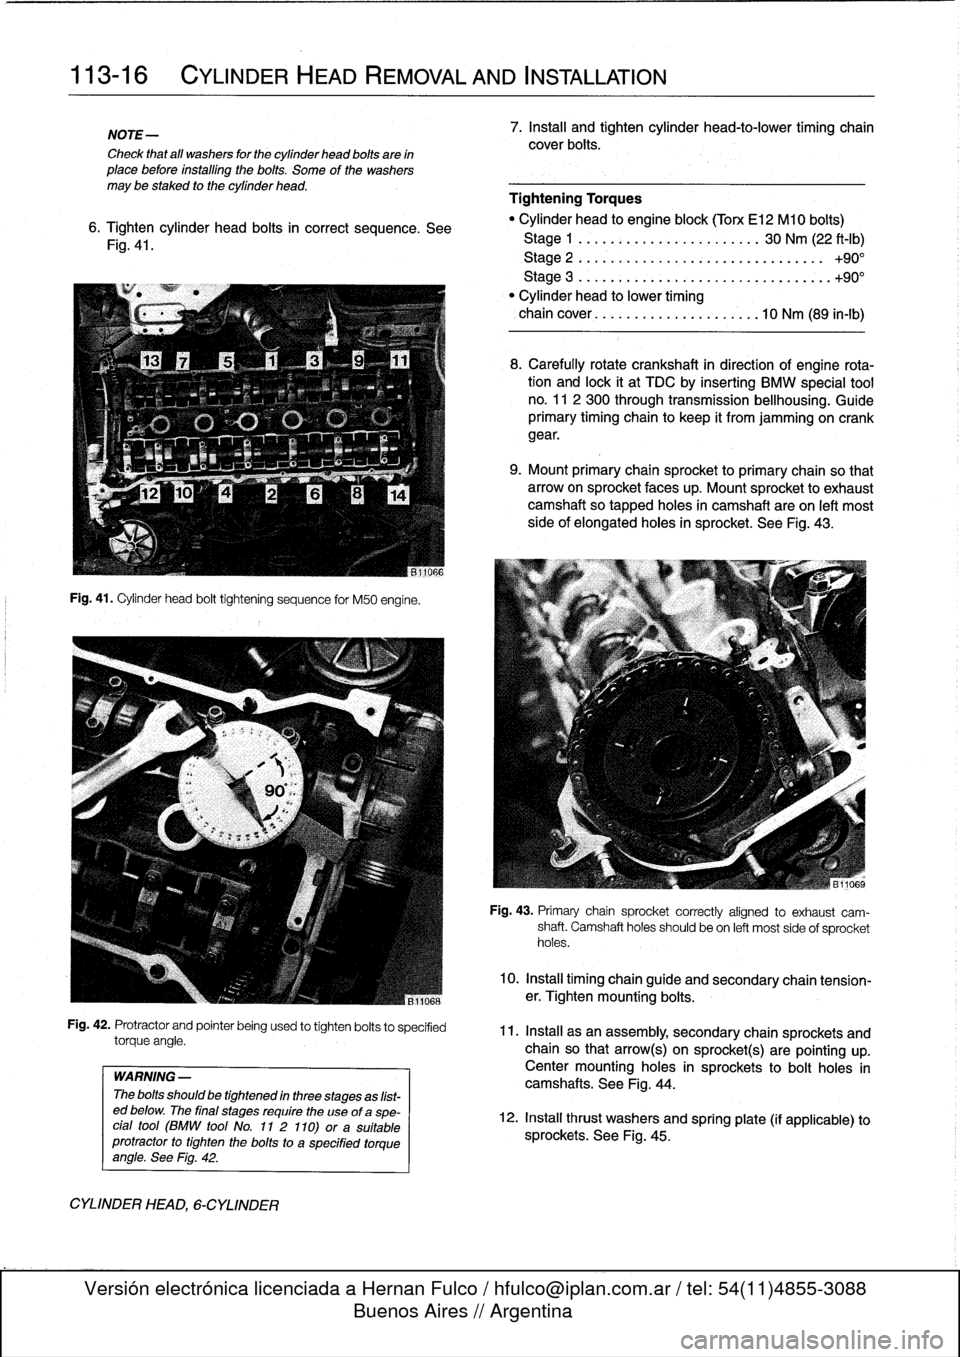 BMW 318i 1998 E36 Owners Guide 
113-16

	

CYLINDER
HEAD
REMOVAL
AND
INSTALLATION

NOTE-

Check
that
all
washers
for
the
cylinder
head
bolts
are
in
place
before
installlng
the
bolts
.
Some
of
the
washers
may
be
staked
to
the
cylind